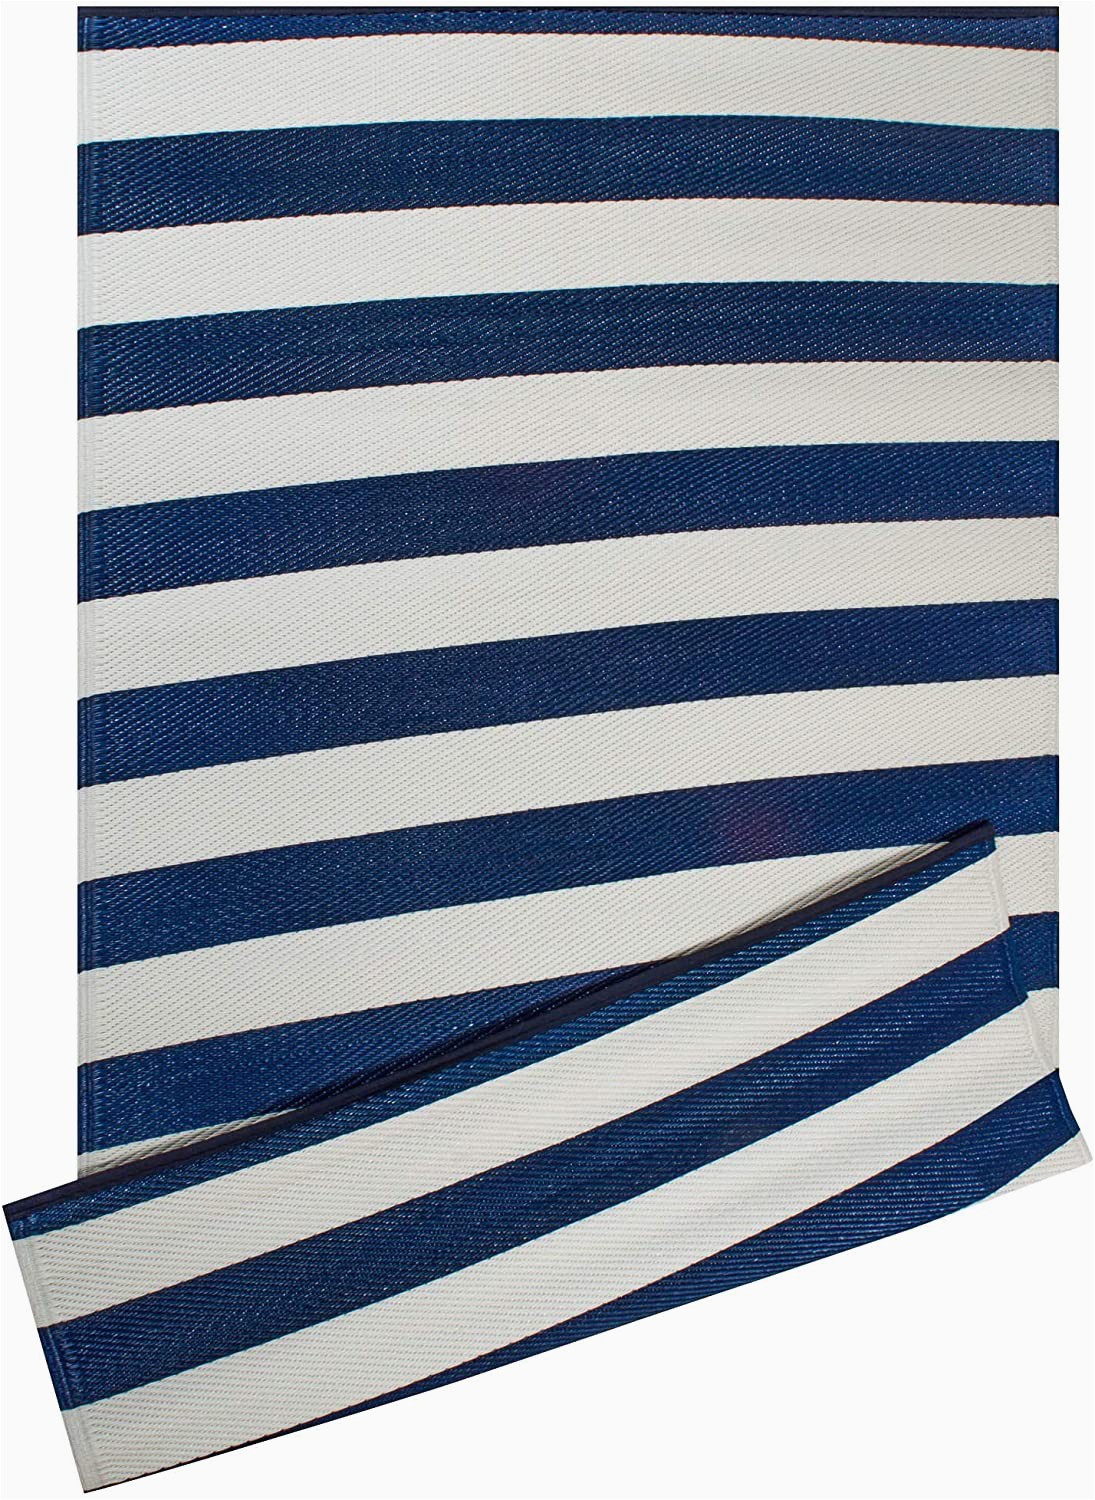 Navy Blue and White Striped Rug Dii Reversible Indoor Woven Striped Outdoor Rug 4×6 White & Navy